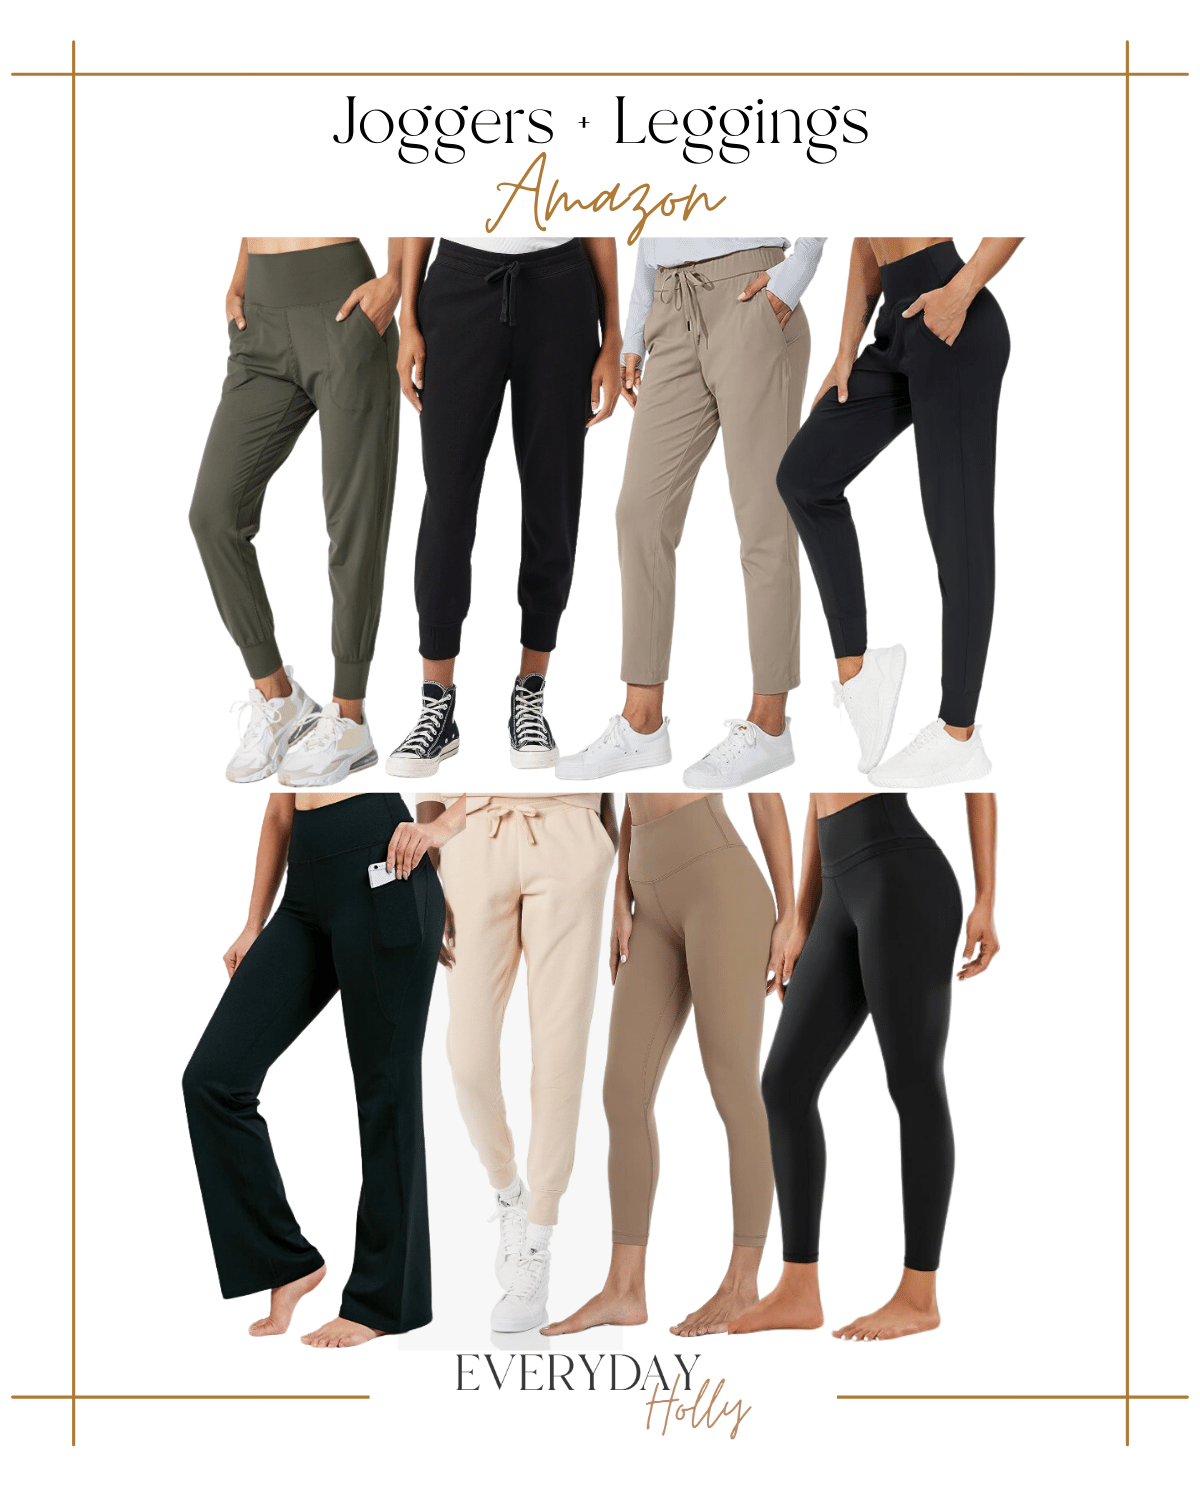 trendy and comfy athleisure styles that you need | #trendy #comfy #athleisure #joggers #leggings #sweatpants #travel #sports #athletic #fleecelined #capri #lounge